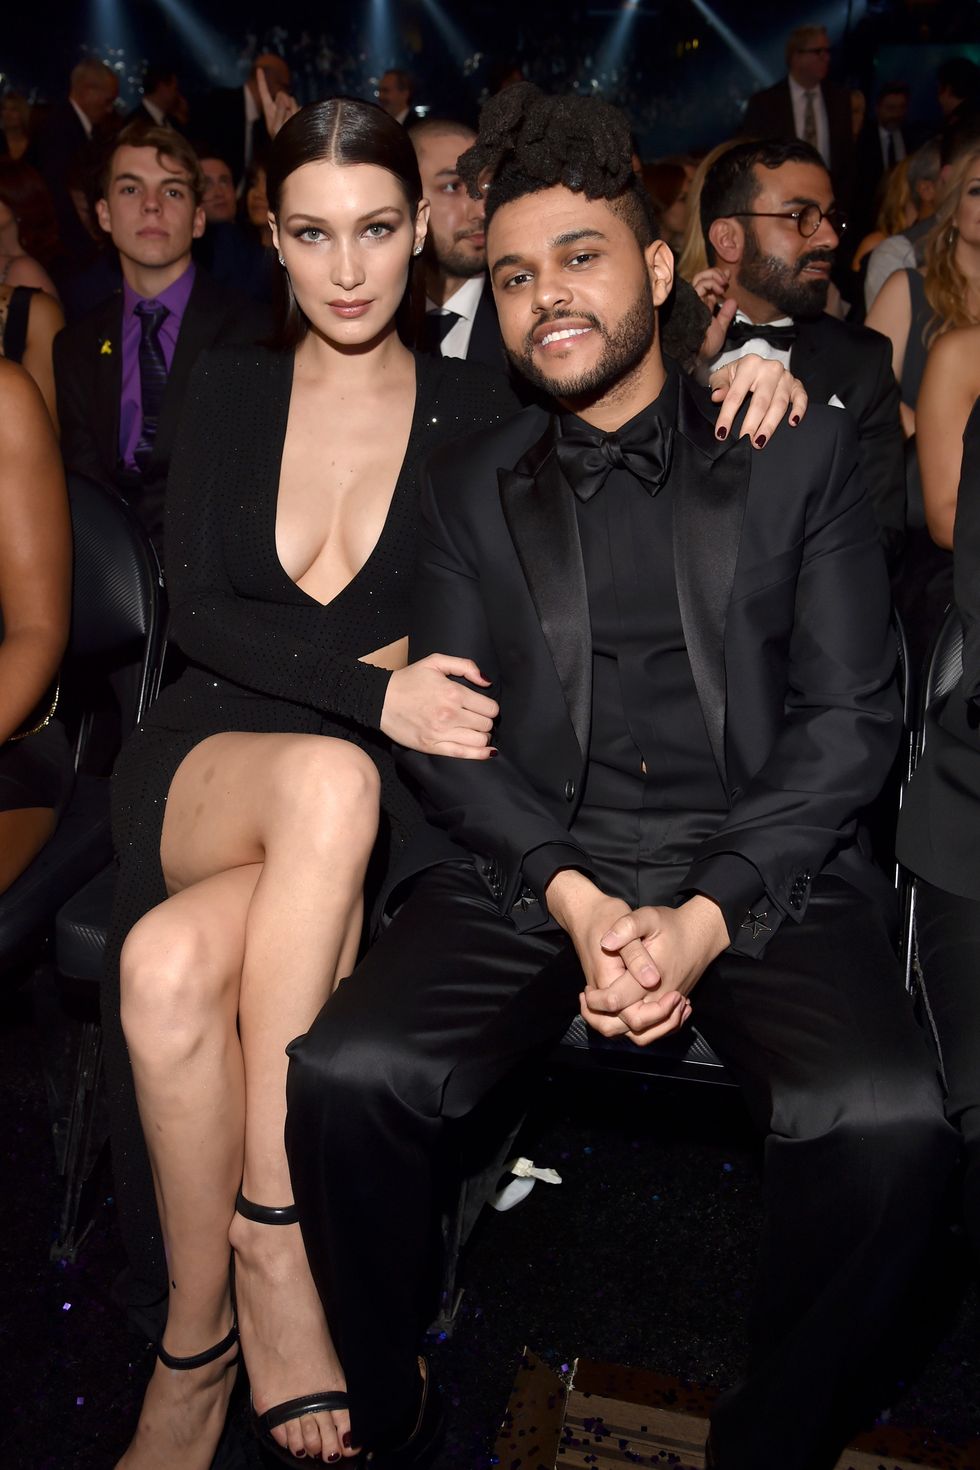 <p>Hadid and The Weeknd quickly rose as the It supermodel-musician couple of the moment when they began dating back in 2015. The model starred in his music video for "In The Night" and the couple attended several award shows arm-in-arm throughout their relationship. But just two weeks ago, it was announced that the young <a href="http://www.harpersbazaar.com/celebrity/latest/news/a18792/bella-hadid-and-the-weeknd-break-up/" target="_blank" data-tracking-id="recirc-text-link">couple called it quits</a> amicably, citing busy work schedules. Later this month, they'll cross paths again at the Victoria's Secret Fashion show, where Hadid will be walking for the first time and The Weeknd will be performing for the second year in a row. </p>